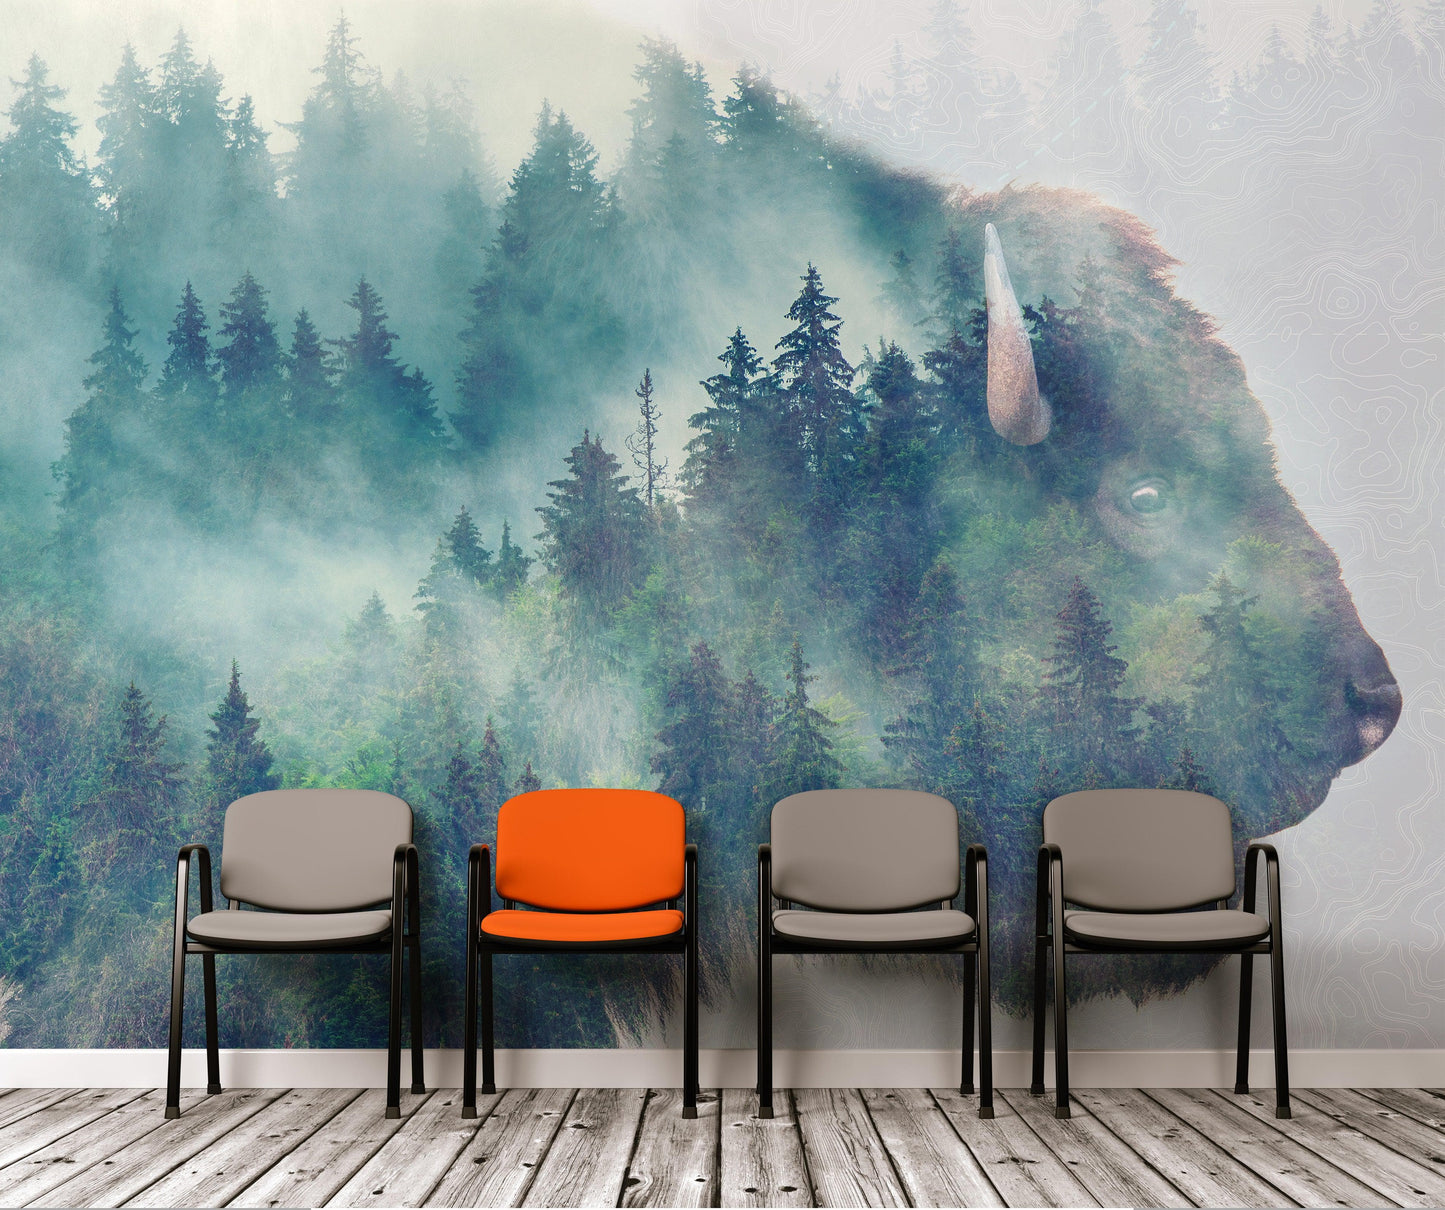 Foggy Mountain Forest View with Bison Buffalo Overlay Natural Scenery Wall Mural #6282.